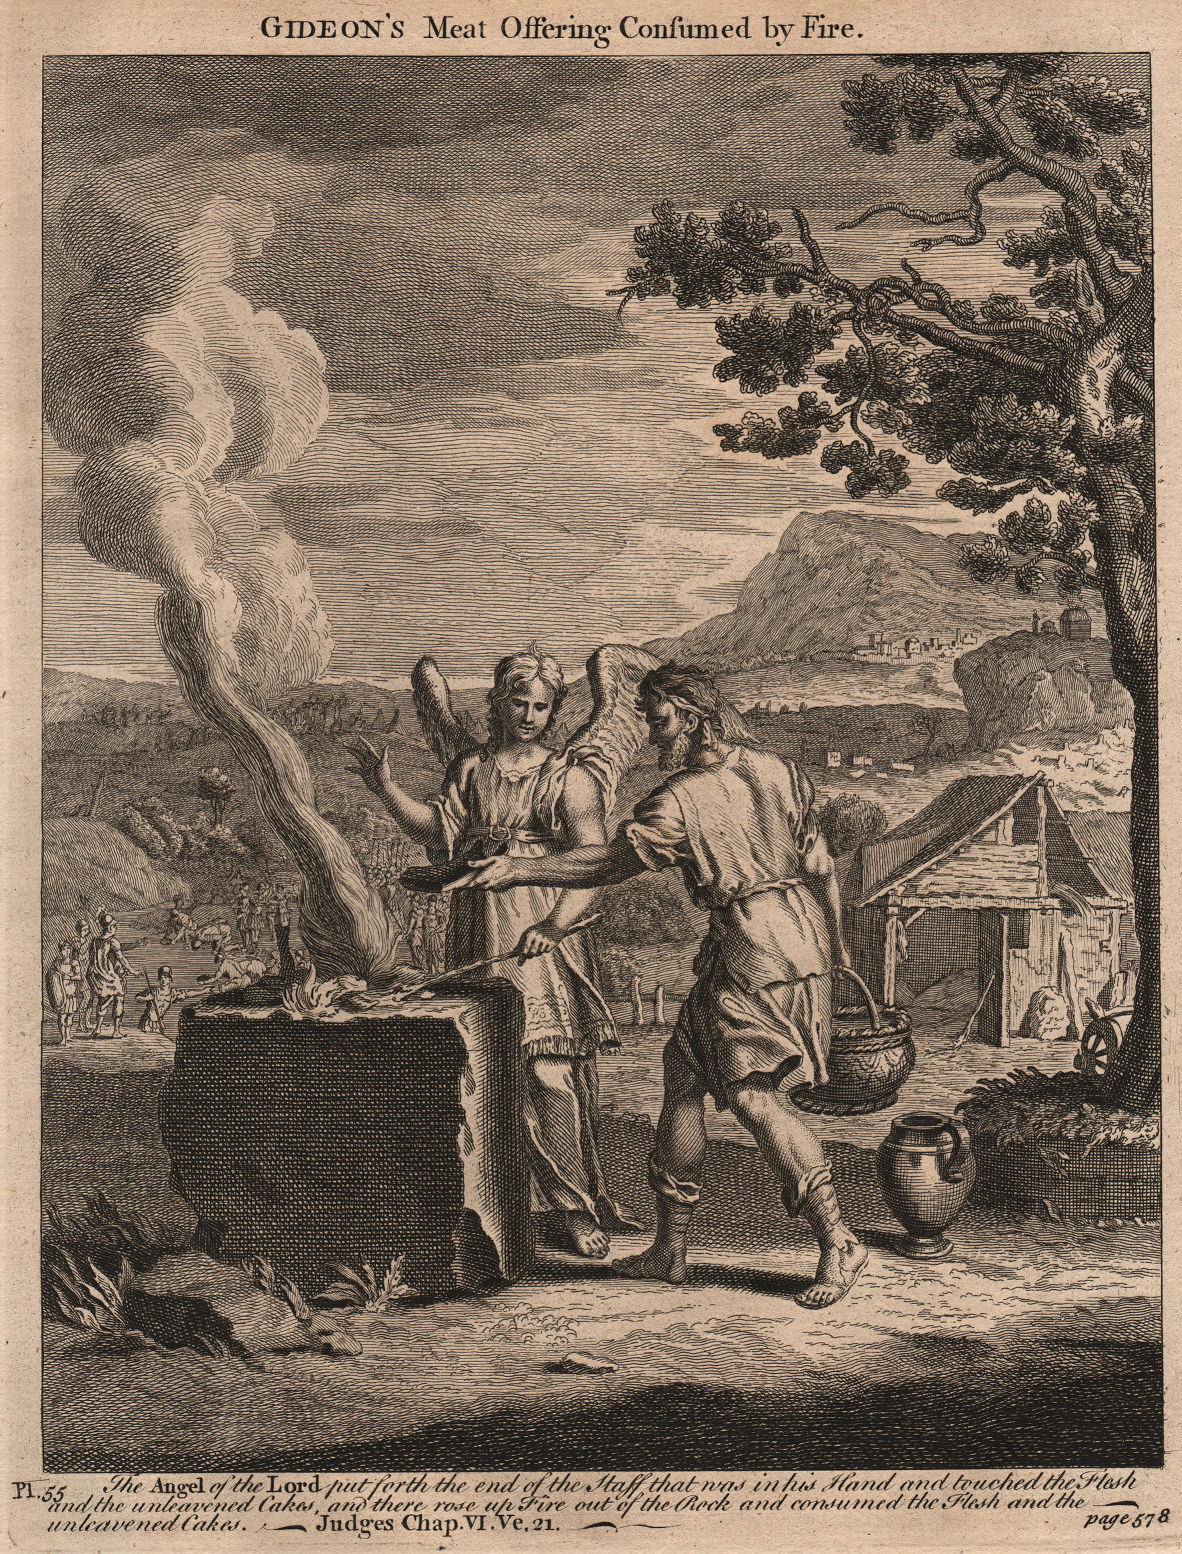 Associate Product BIBLE. Judges 6.21 Gideon's meat offering consumed by fire 1752 old print